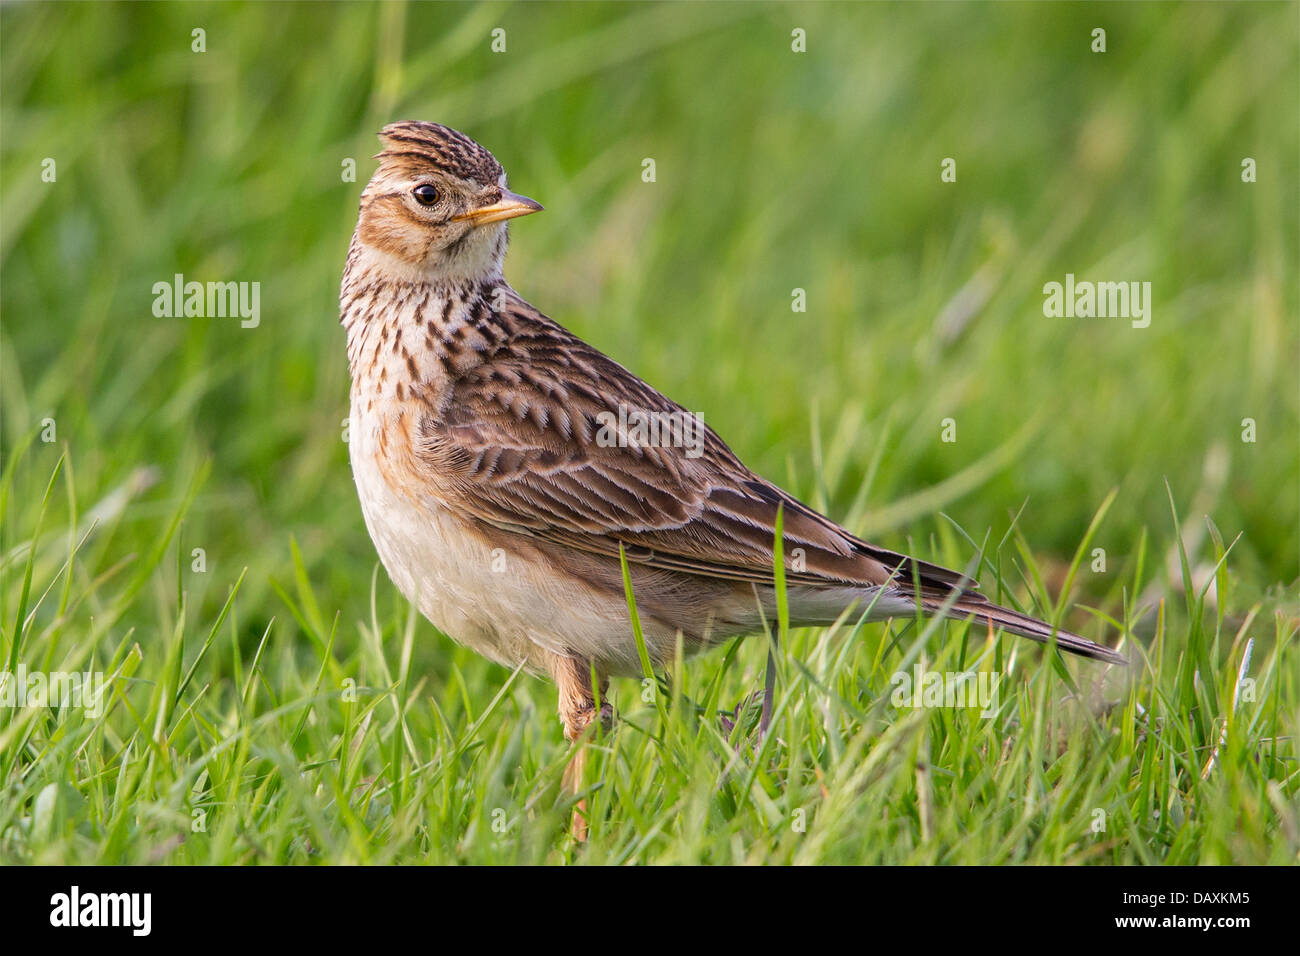 A wild meadow pipet () standing in grassy farmland, UK Stock Photo